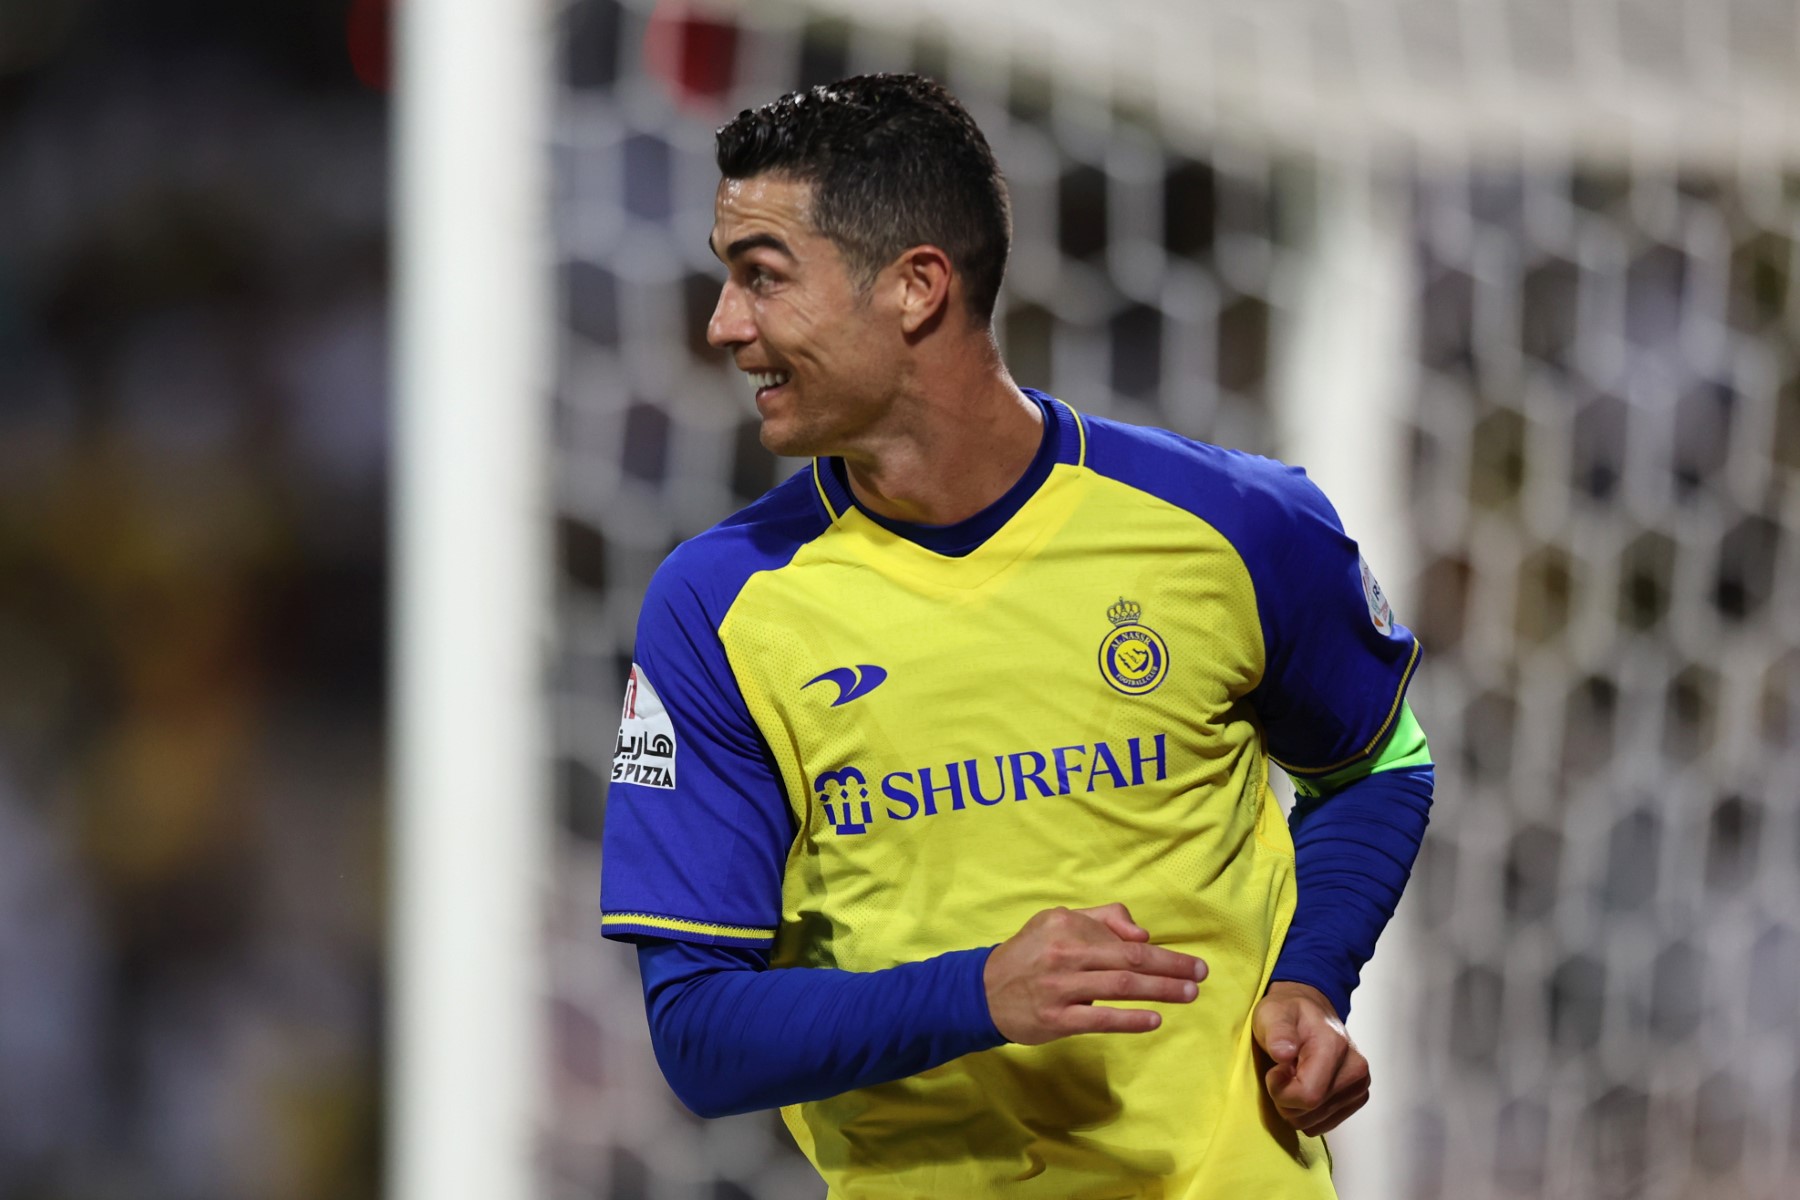 Ronaldo Plans to Continue in Al Nassr, Sees Potential for Growth in Saudi League